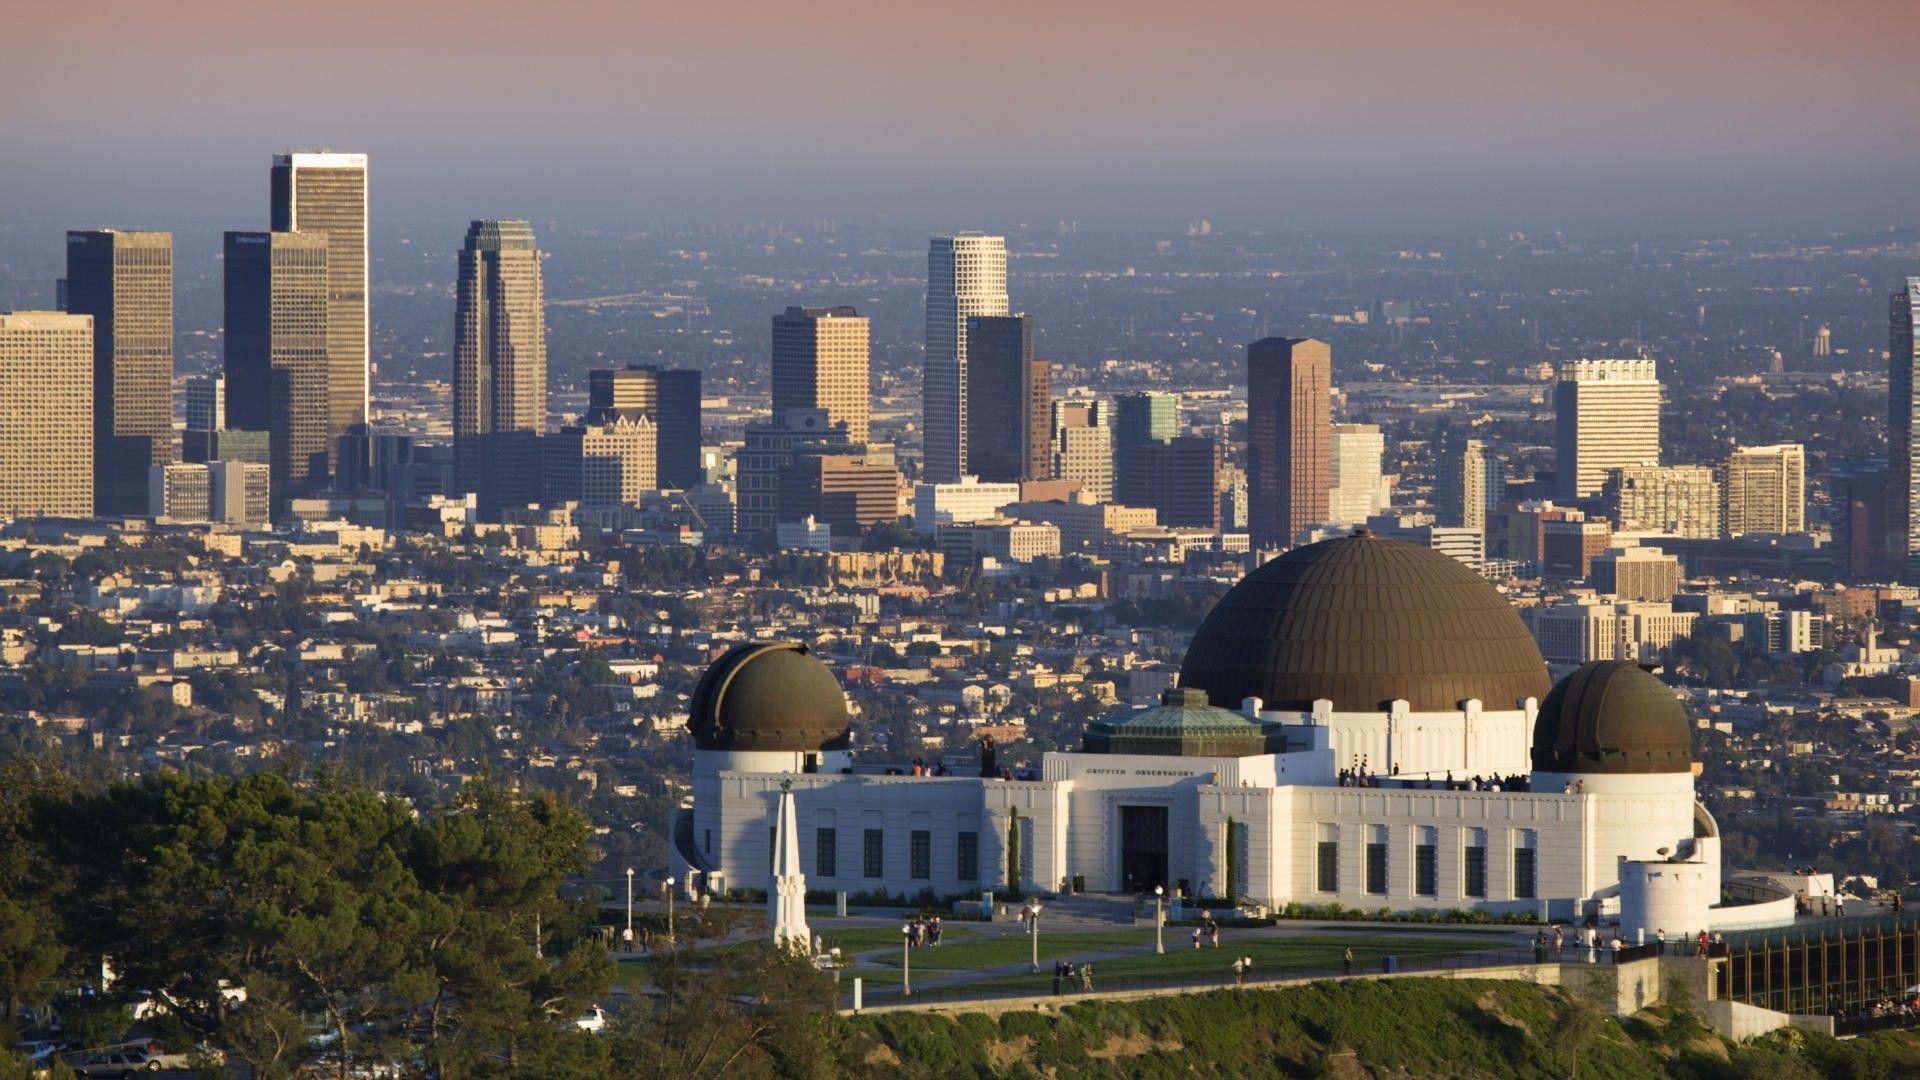 Griffith Observatory, Los Angeles, Pictures, 1920x1080 Full HD Desktop